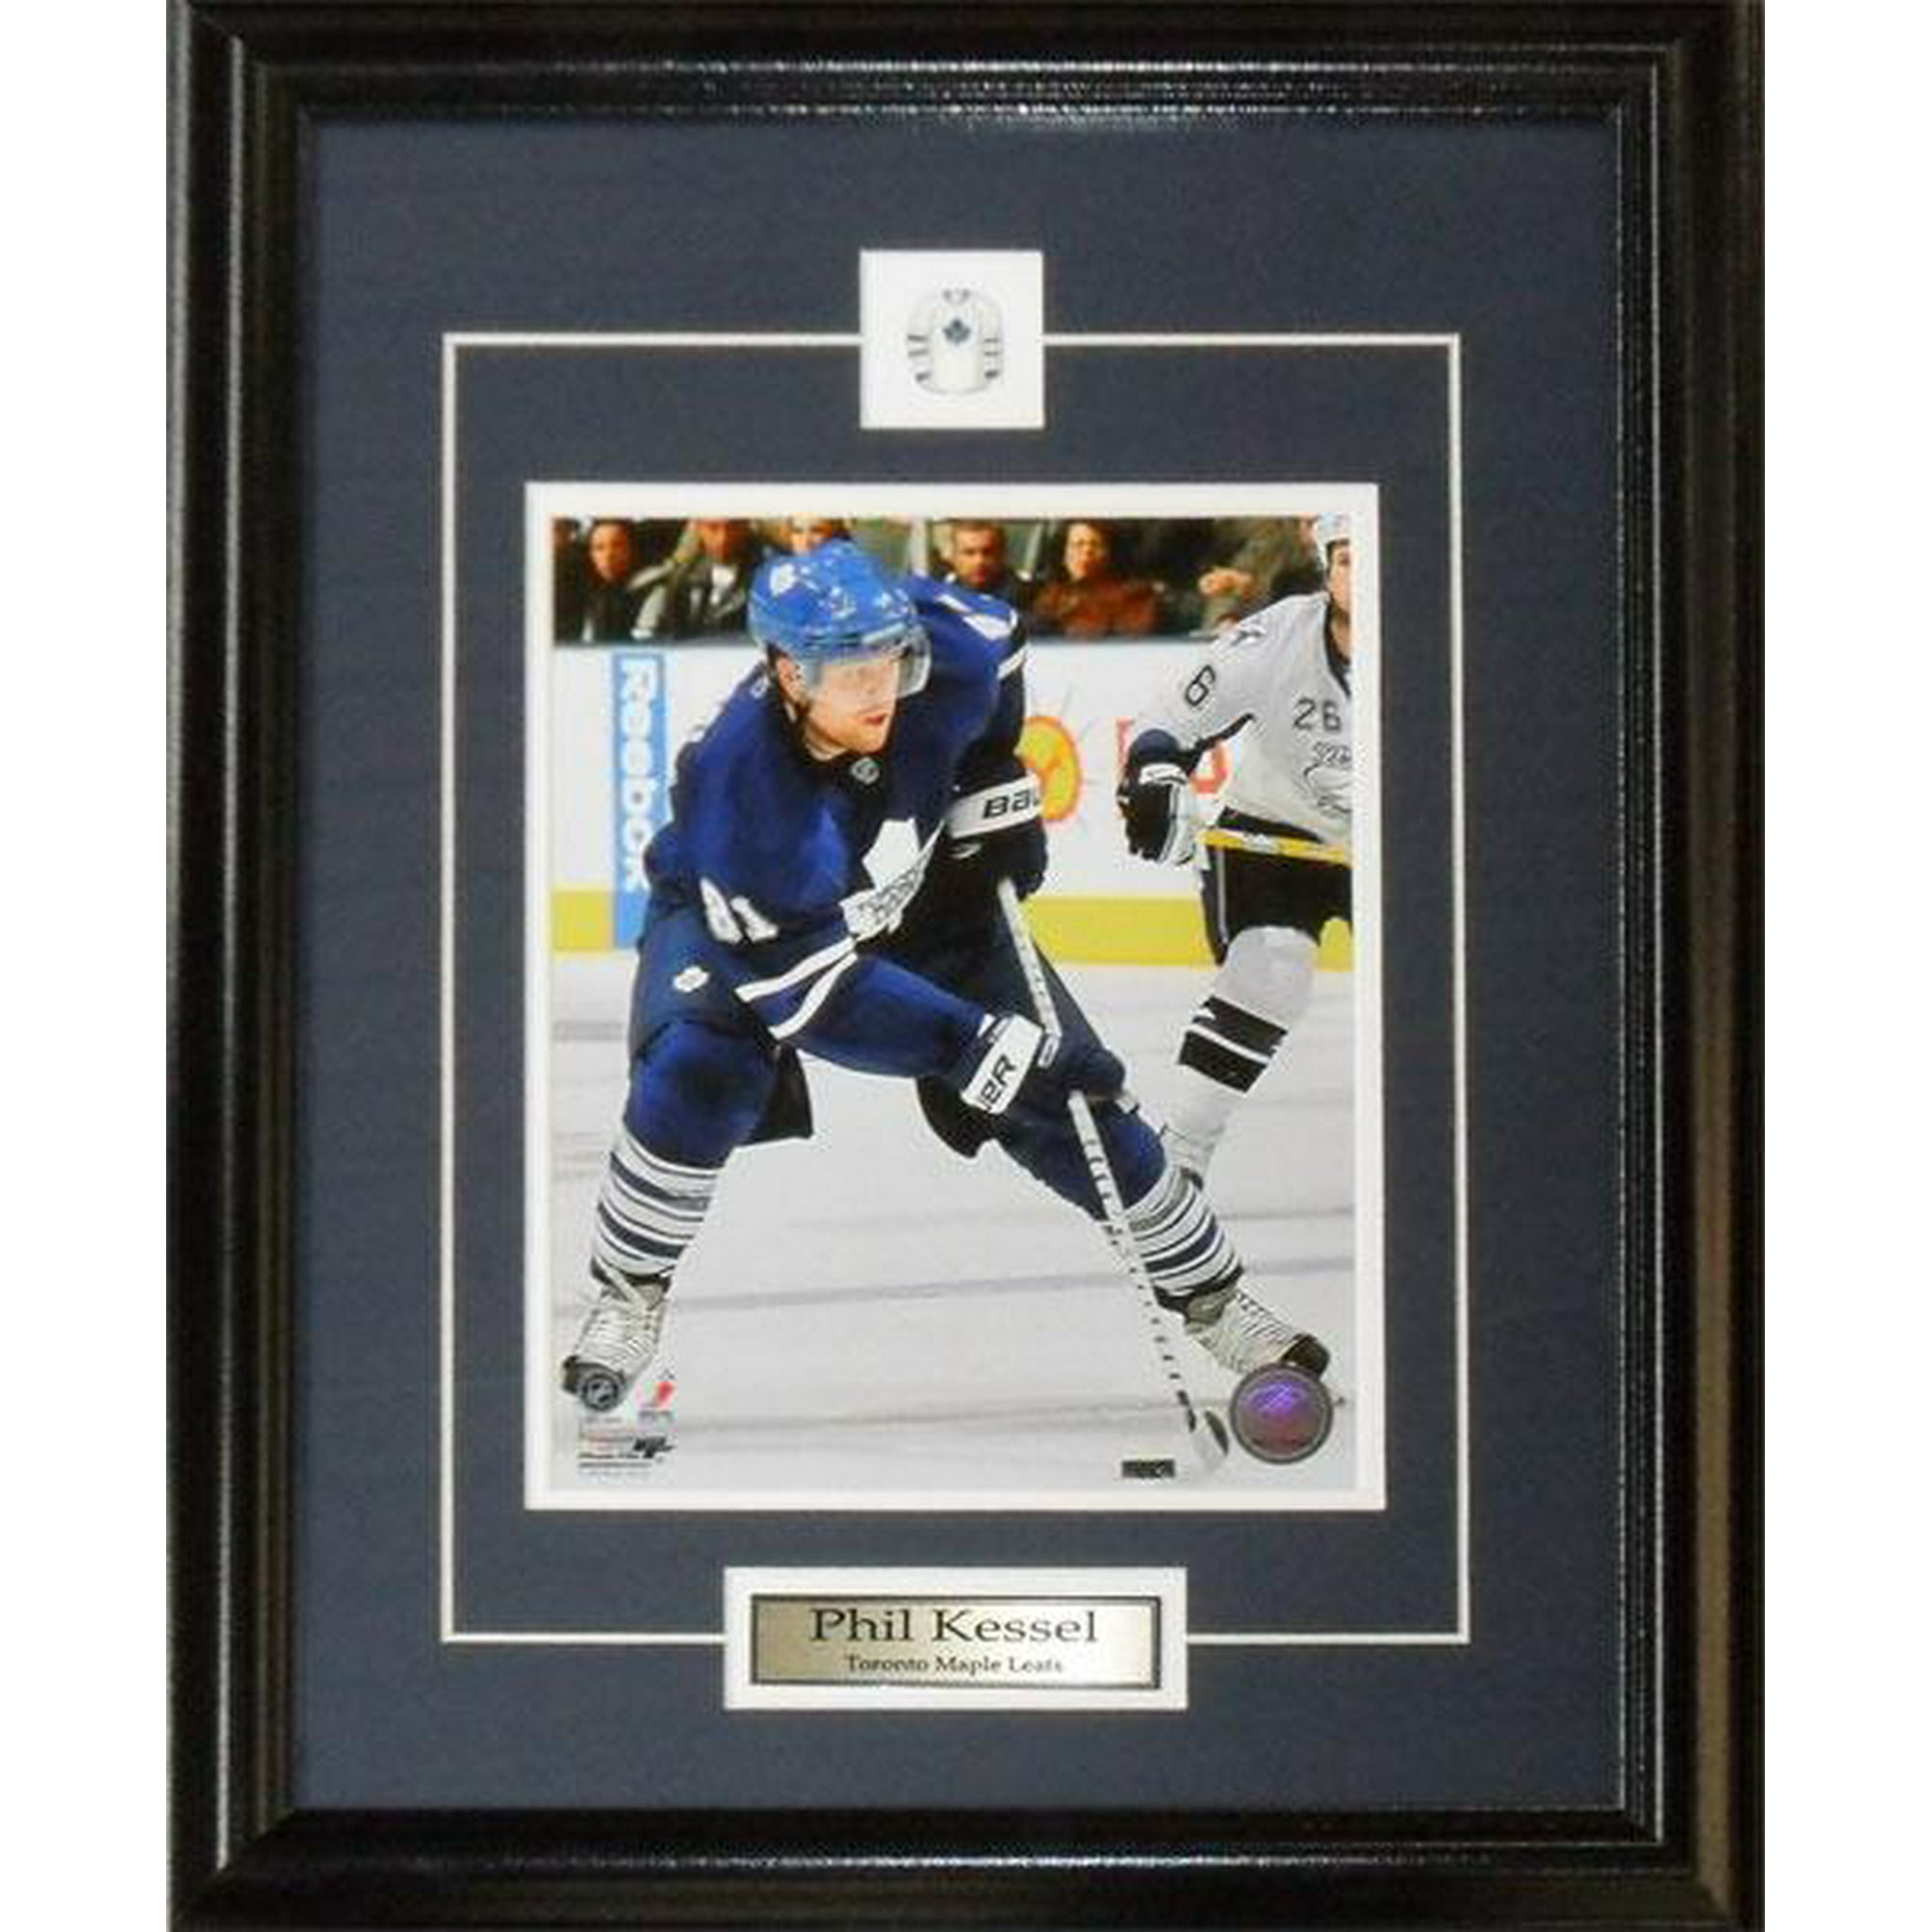 Midway Memorabilia Phil Kessel Toronto Maple Leafs Signed Jersey Frame